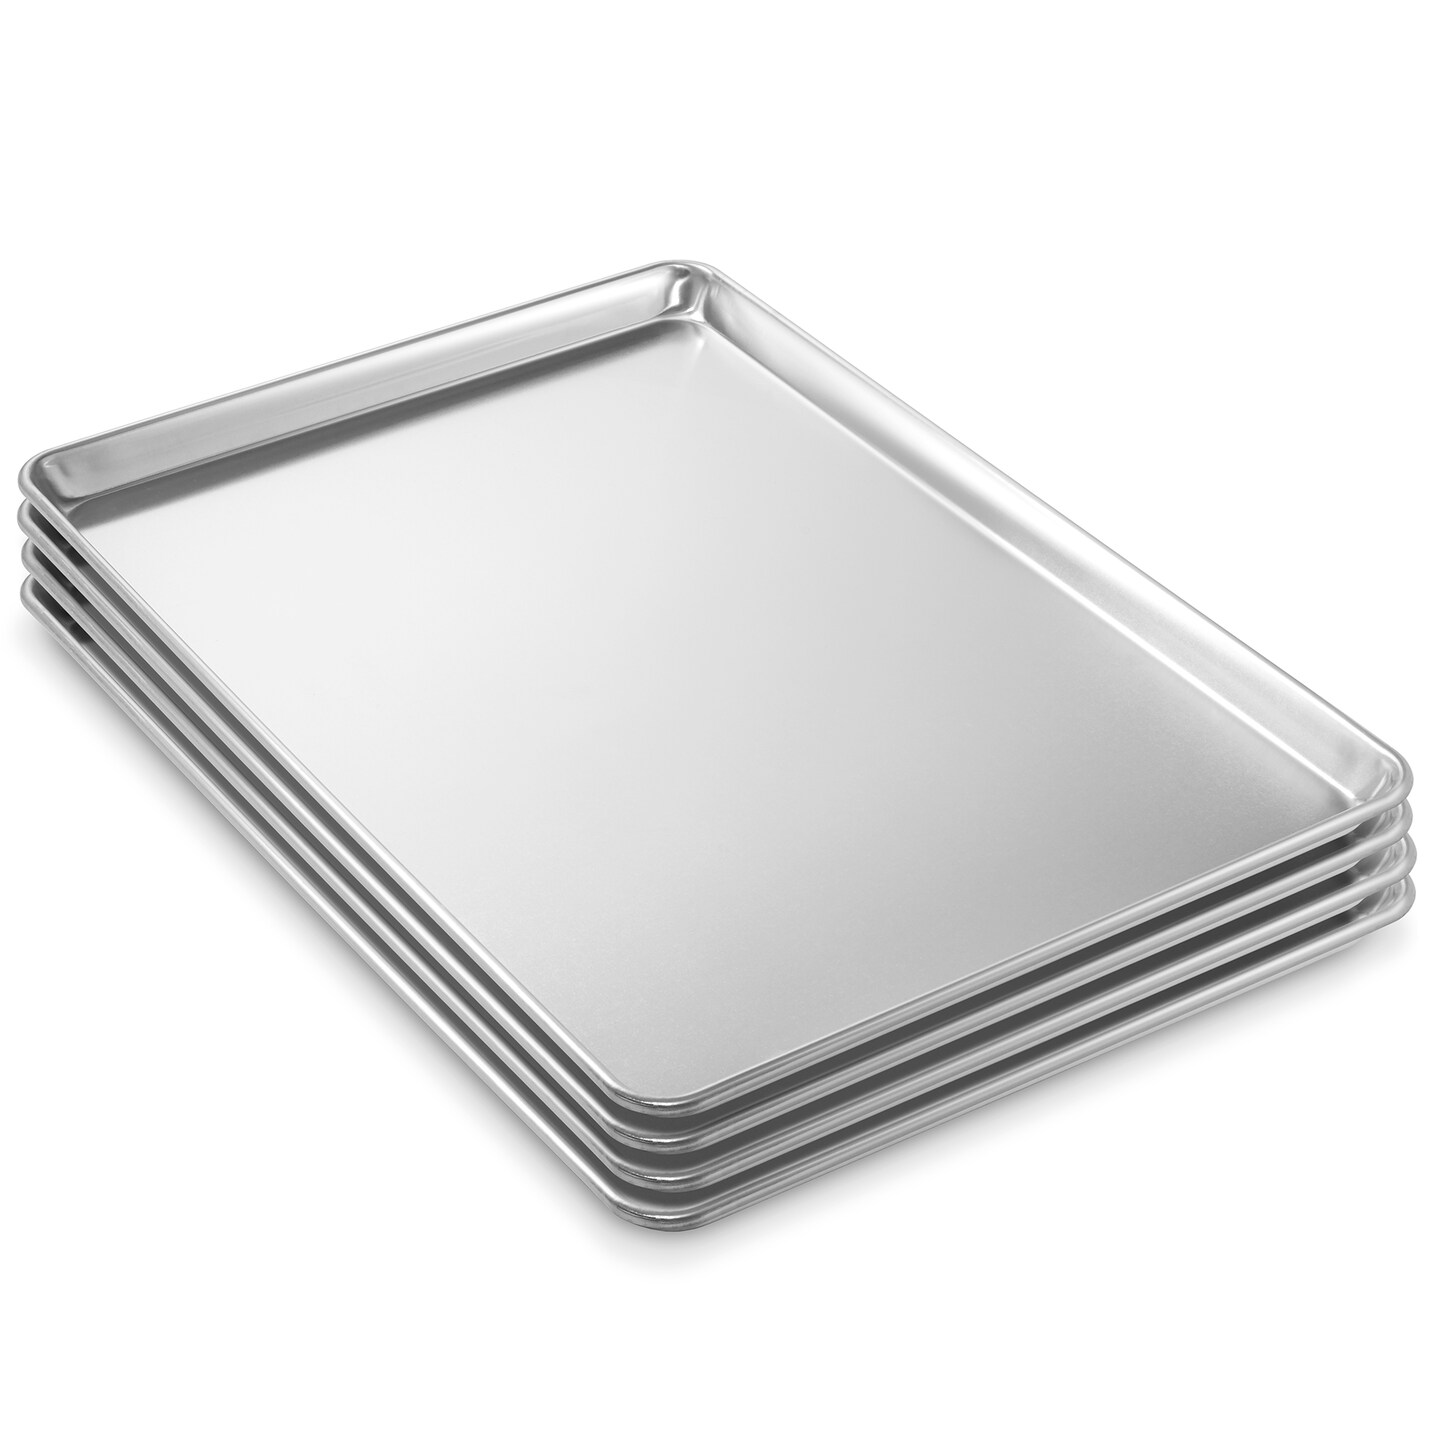 Crestware Sheet Pan Pan Cover, 18 by 26-Inch